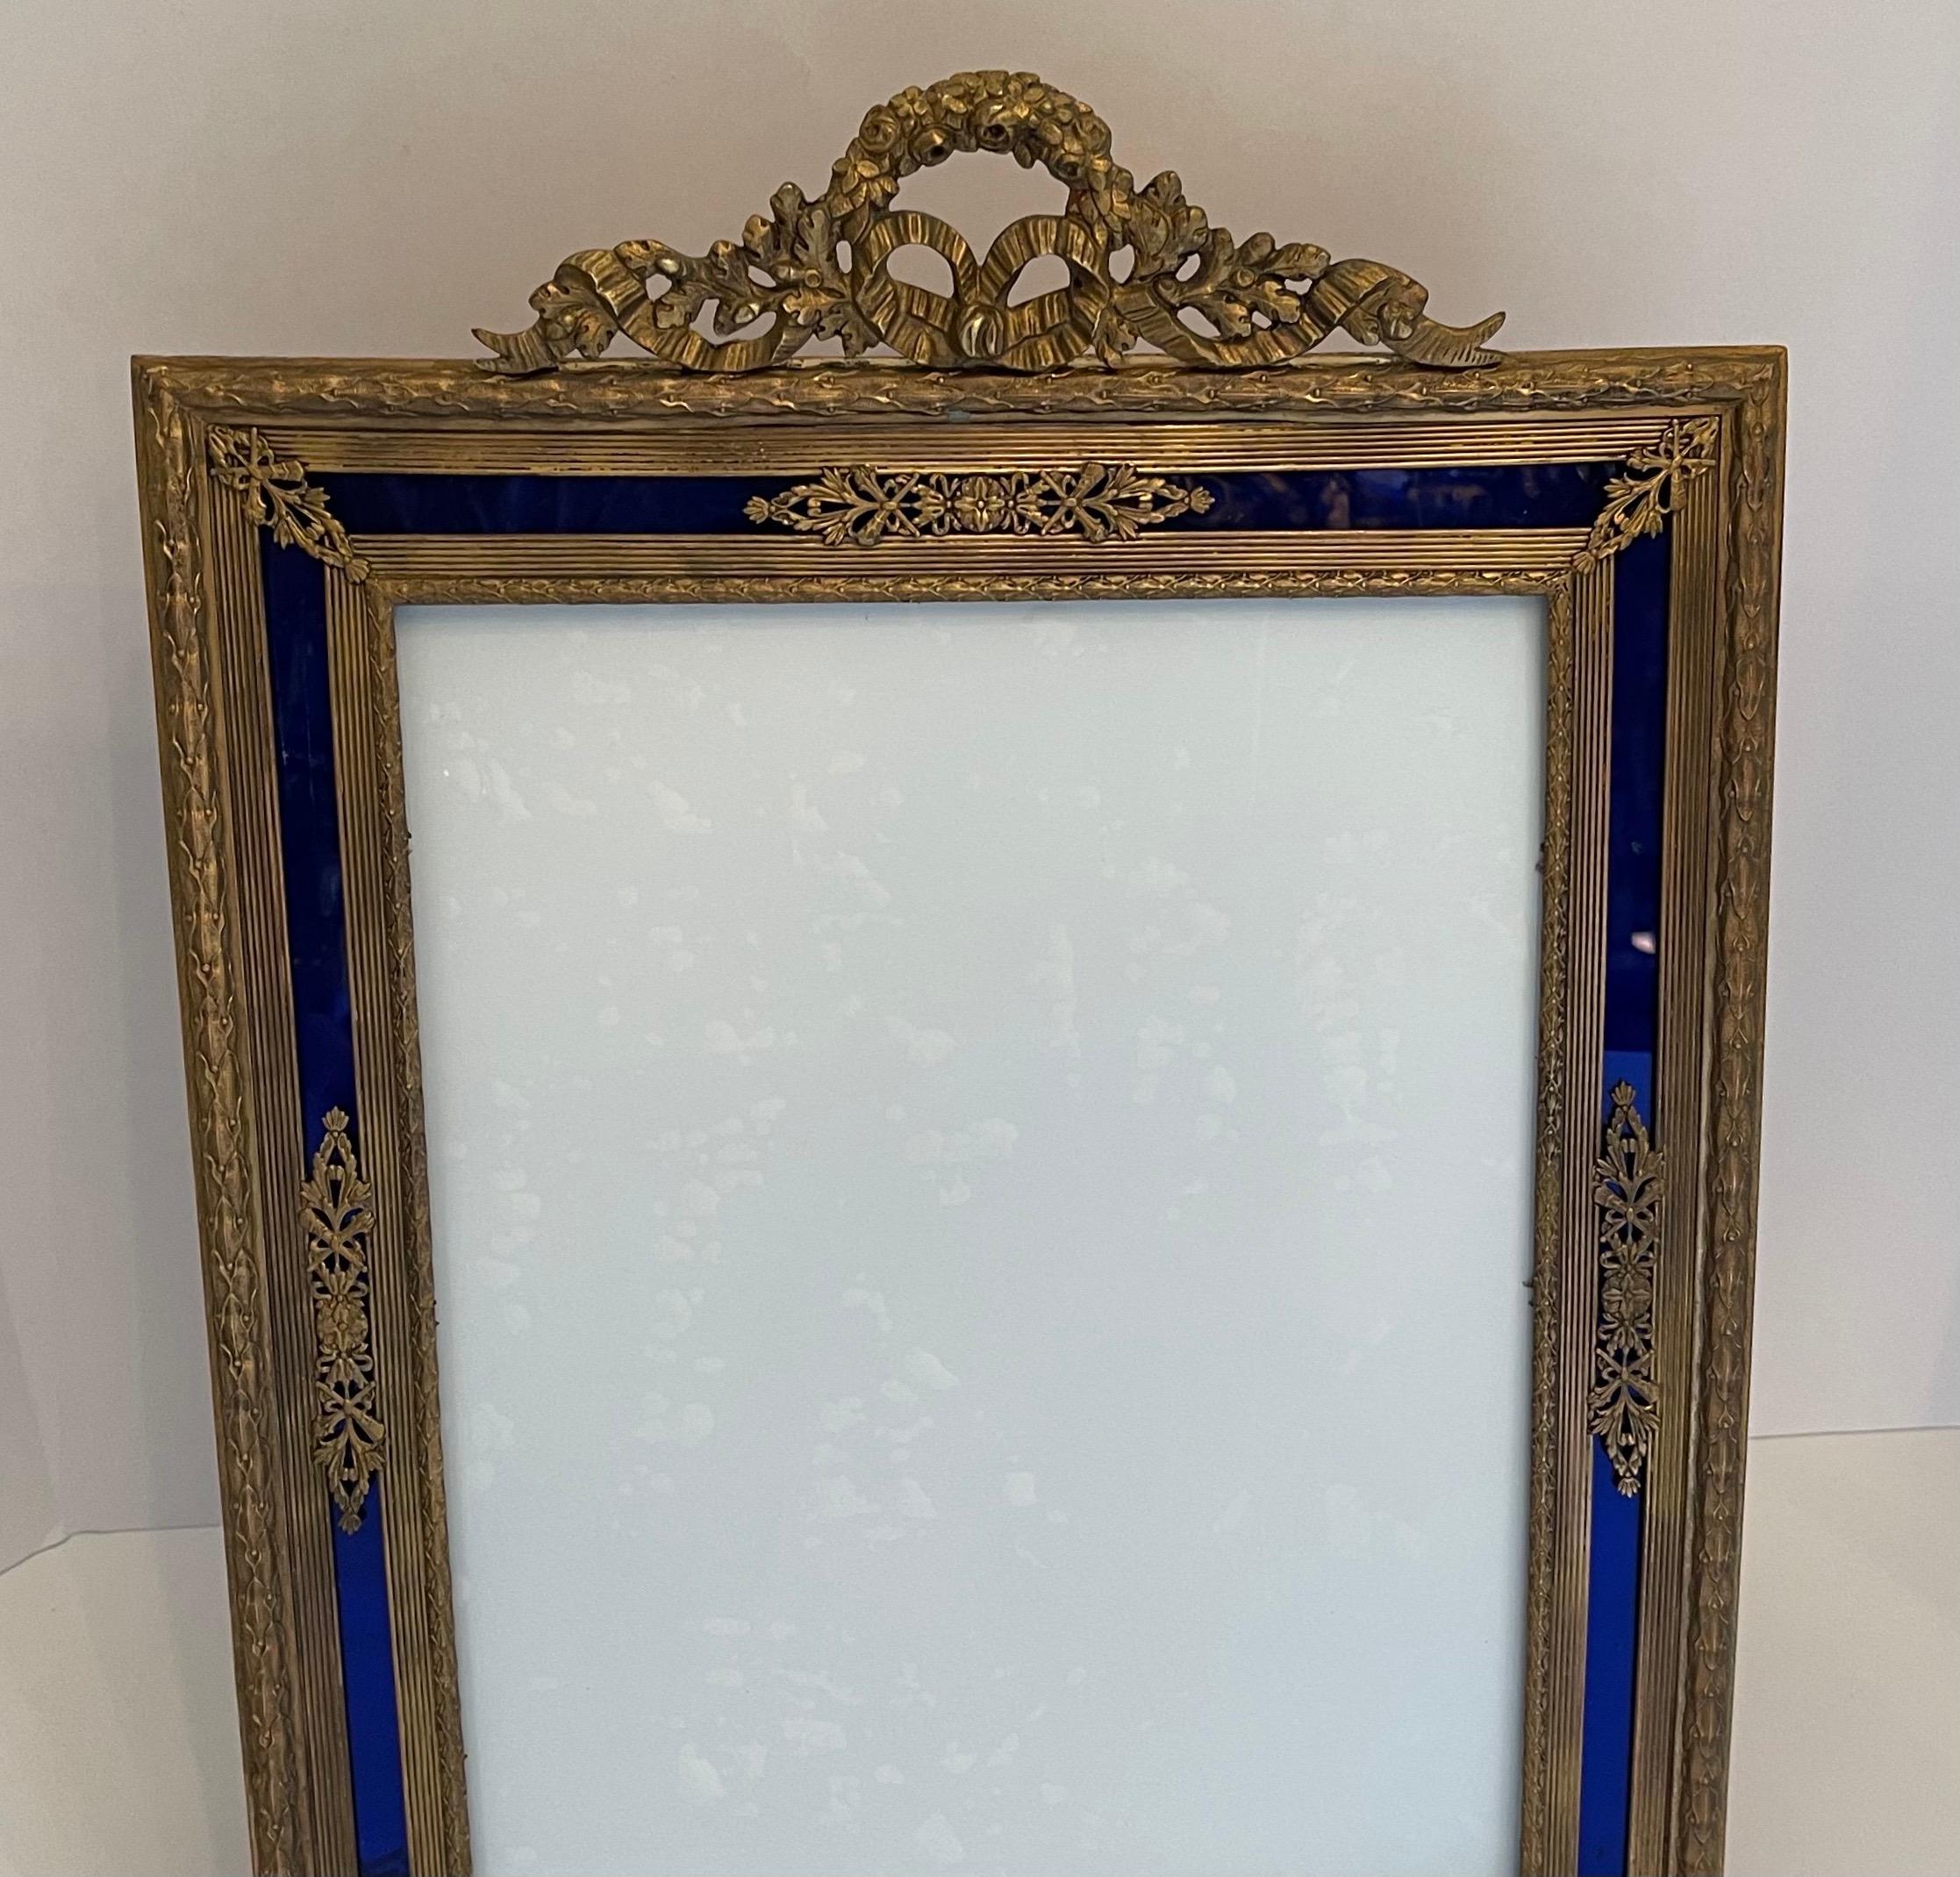 A wonderful large French Louis XVI ormolu bronze and blue glass inset picture frame with wreath and garland crown and bronze easel back.